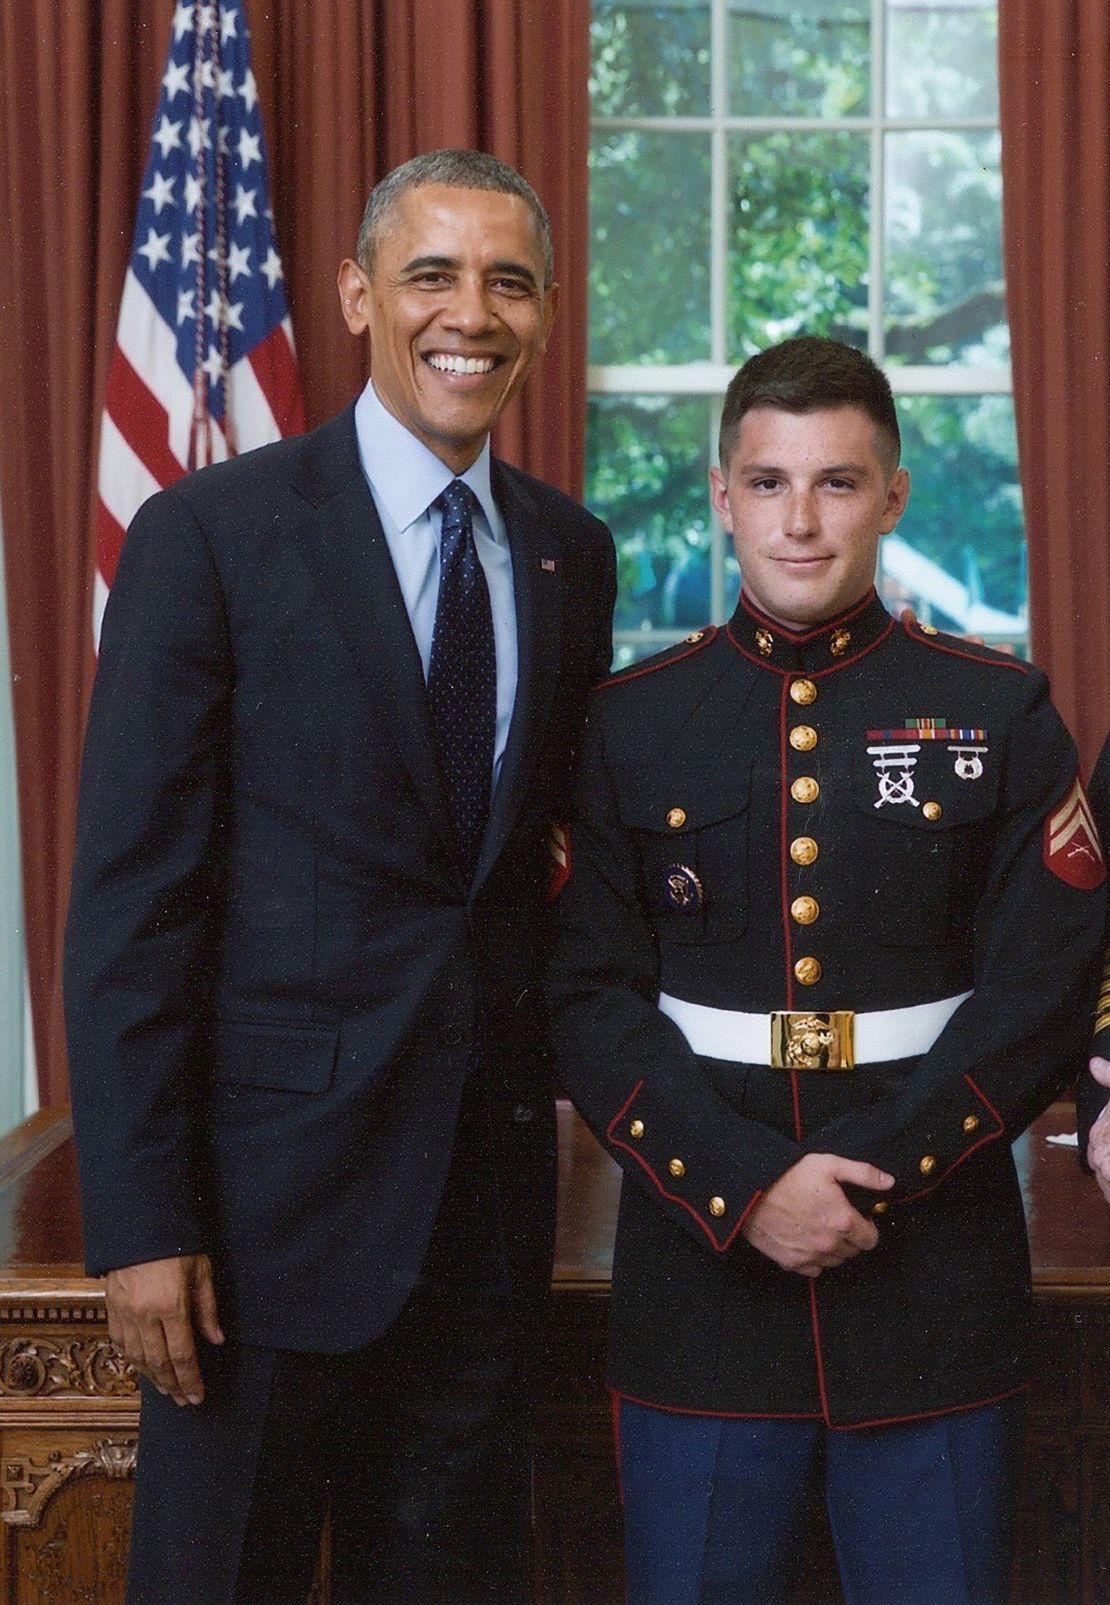 President Obama poses with Trevor Reed in an undated White House photo.